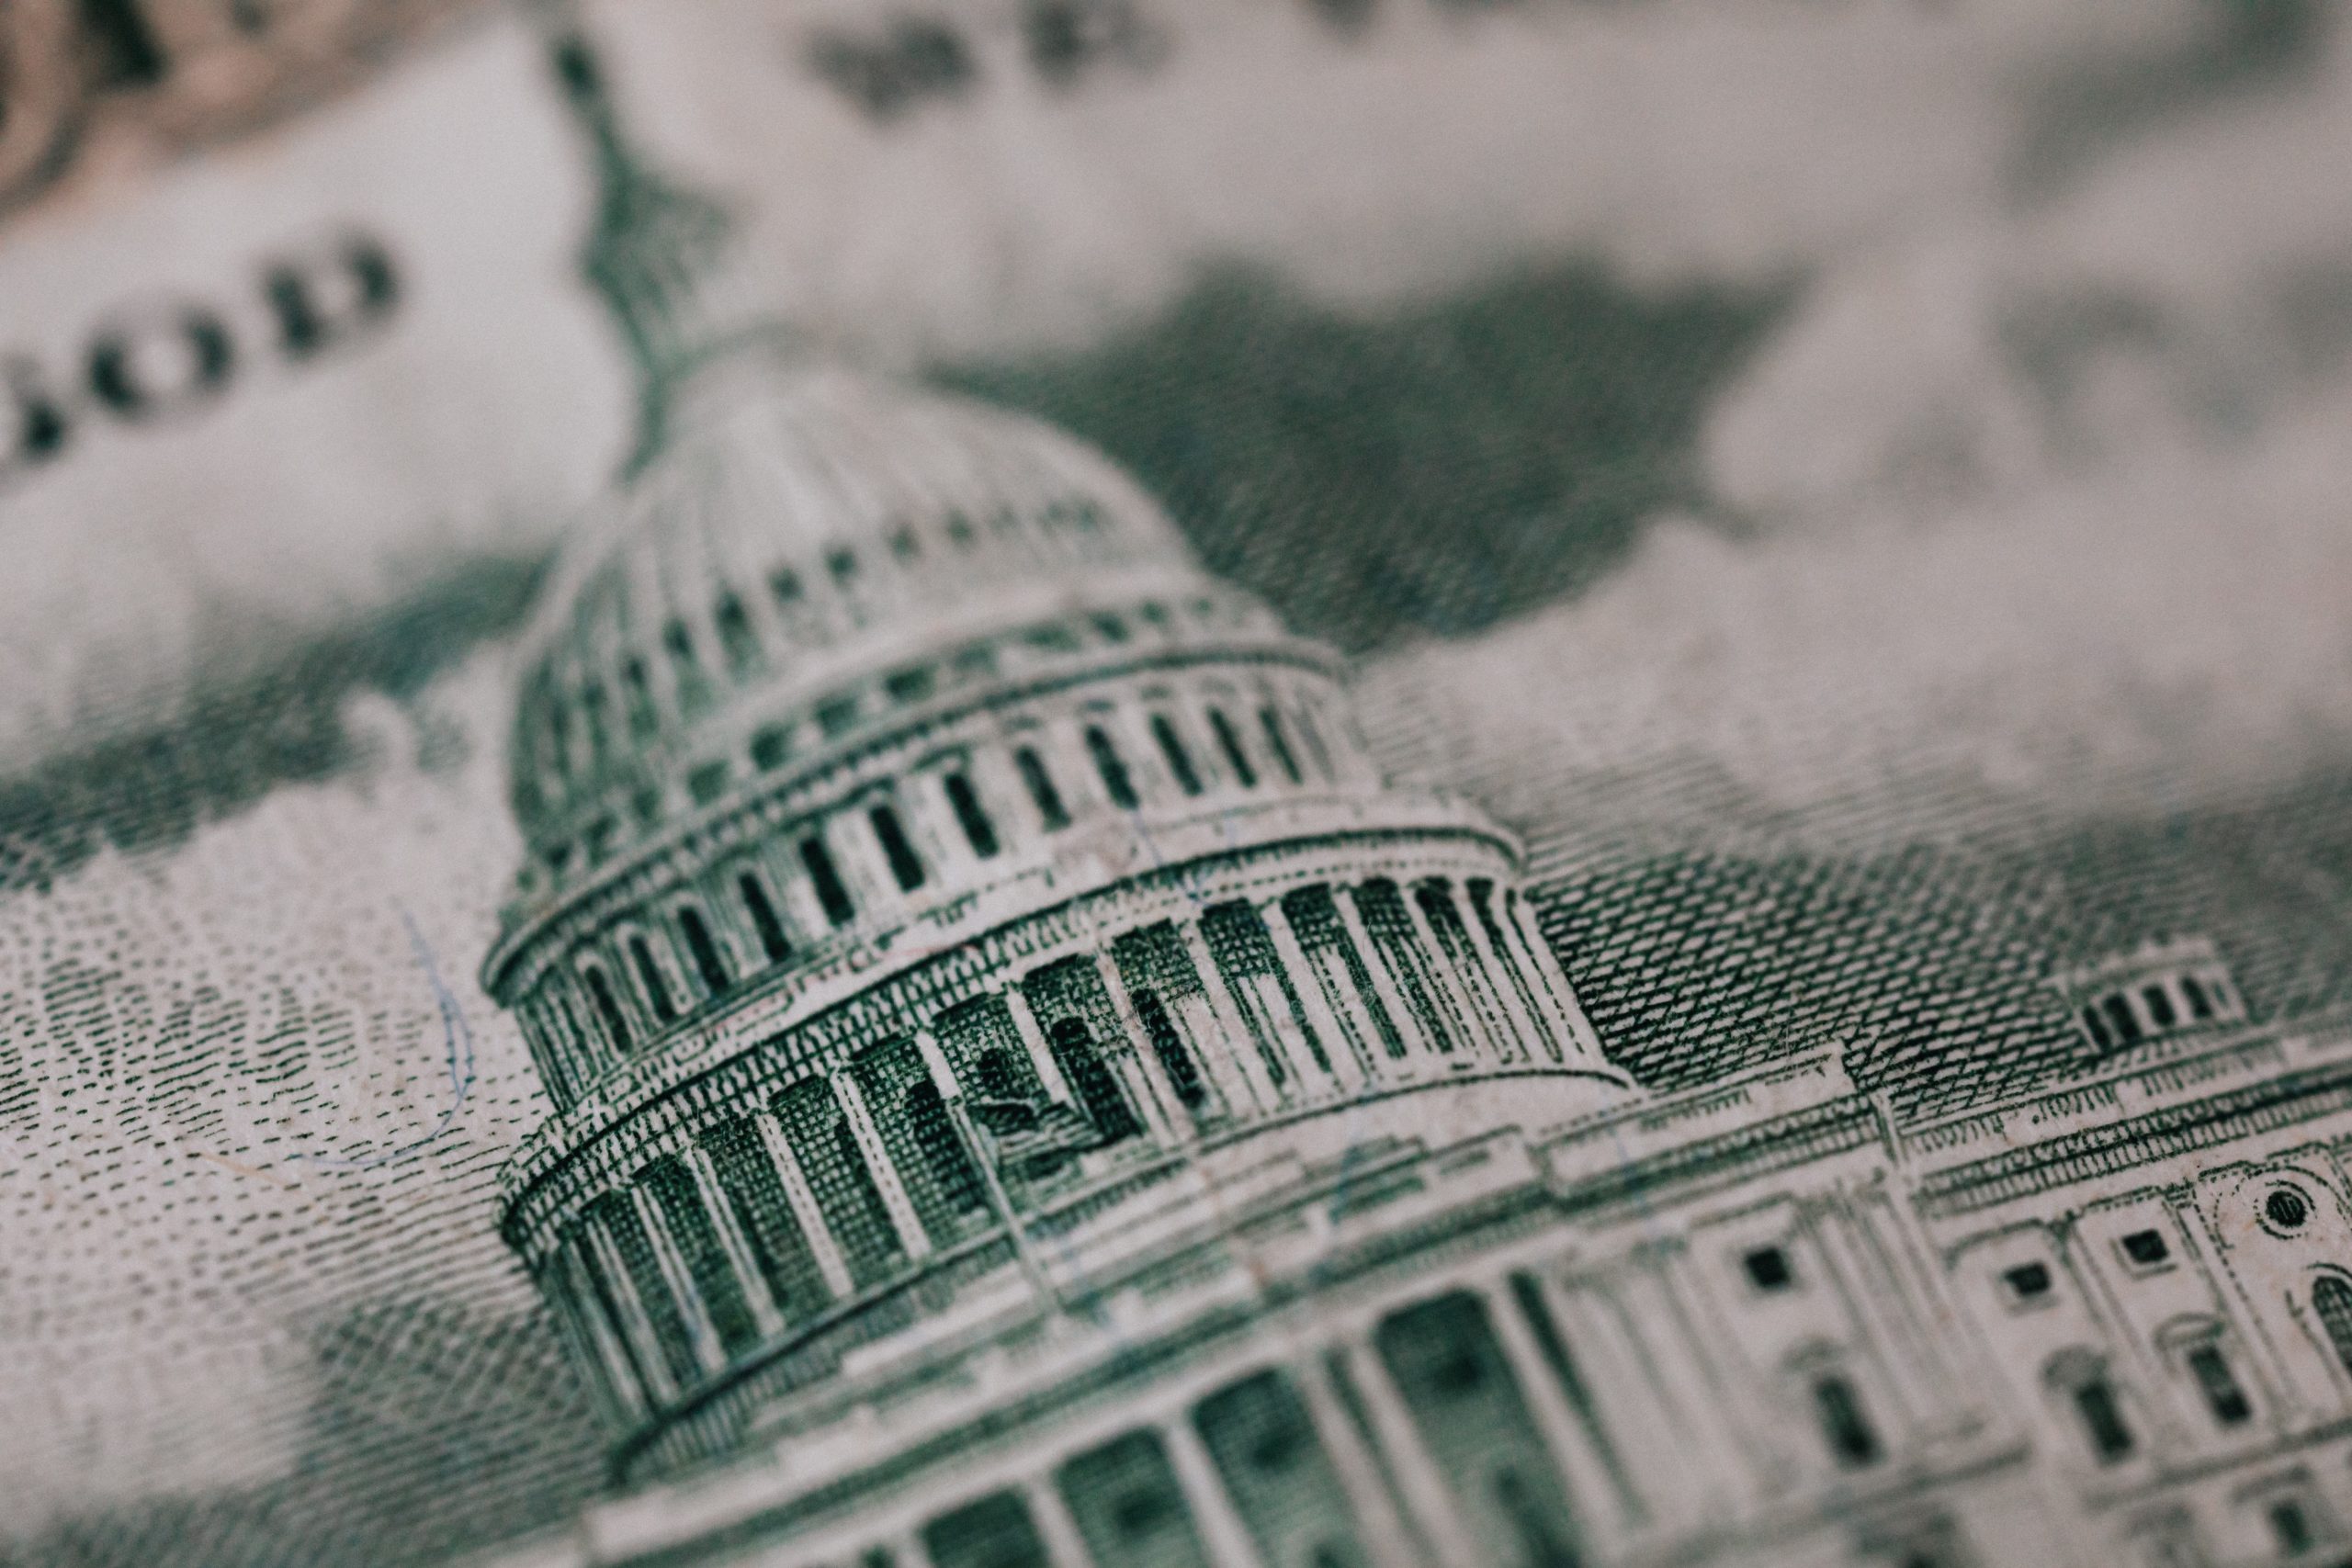 Close-up of illustration of the U.S. Capitol building as printed on the back of the $50 bill